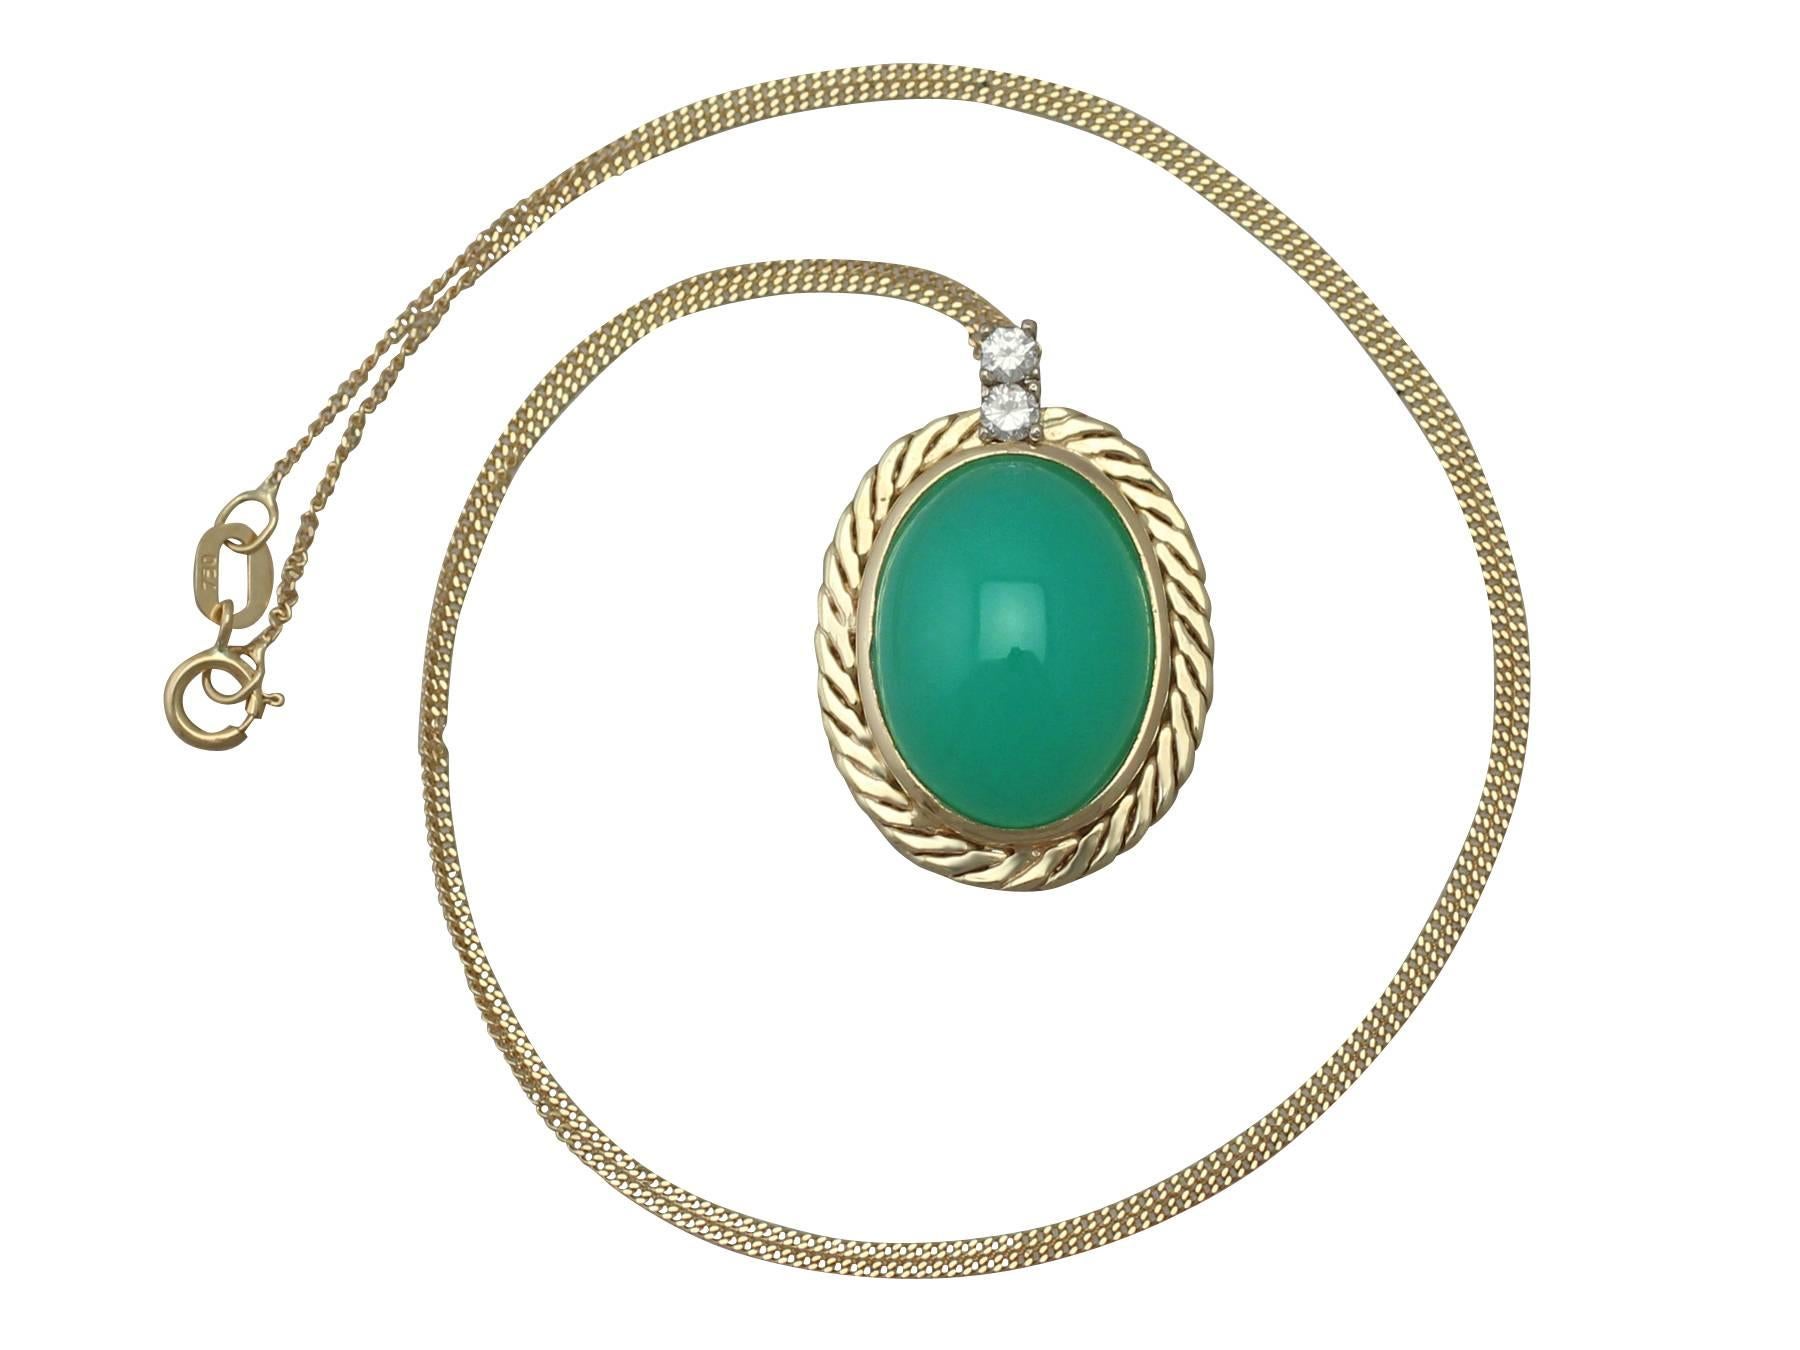 A fine and impressive antique 7.29 carat chrysoprase (green chalcedony), 0.08 carat diamond, 14 karat yellow gold pendant; part of our jewelry and estate jewelry collections

This fine and impressive chrysoprase pendant has been crafted in 14k